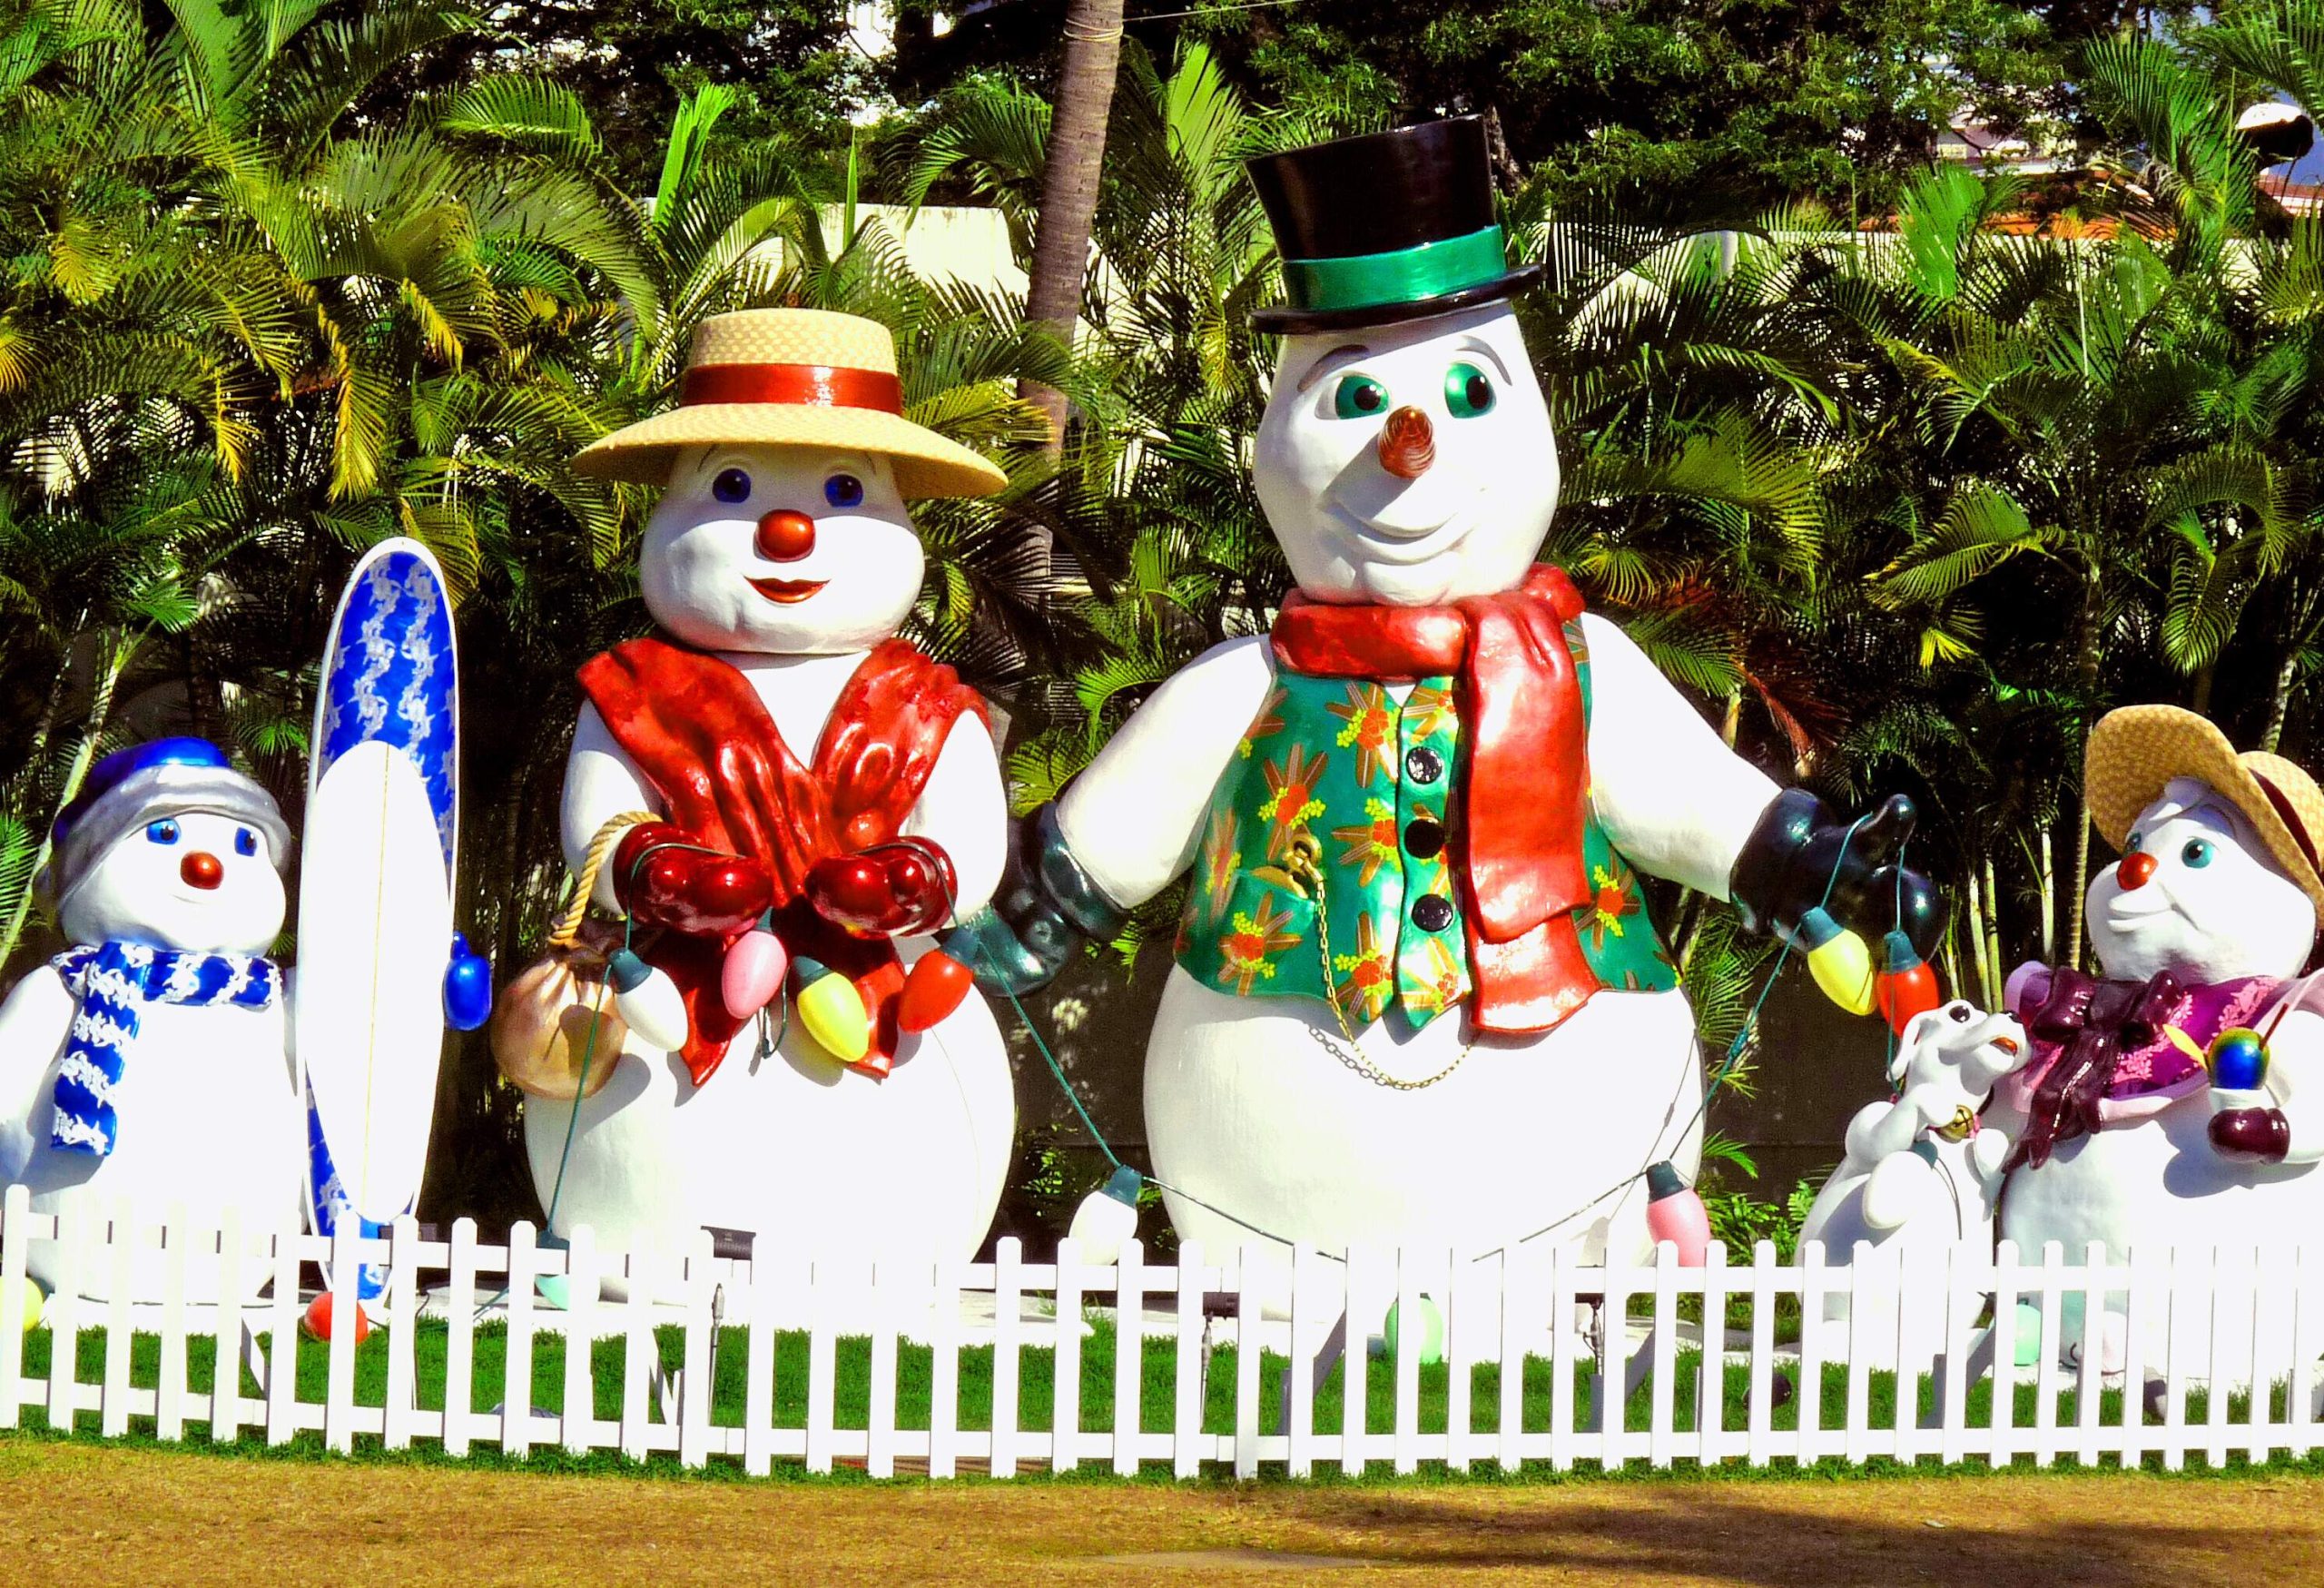 A family of colourful snowman sculptures on a meadow with white fence and palm plants in the back.